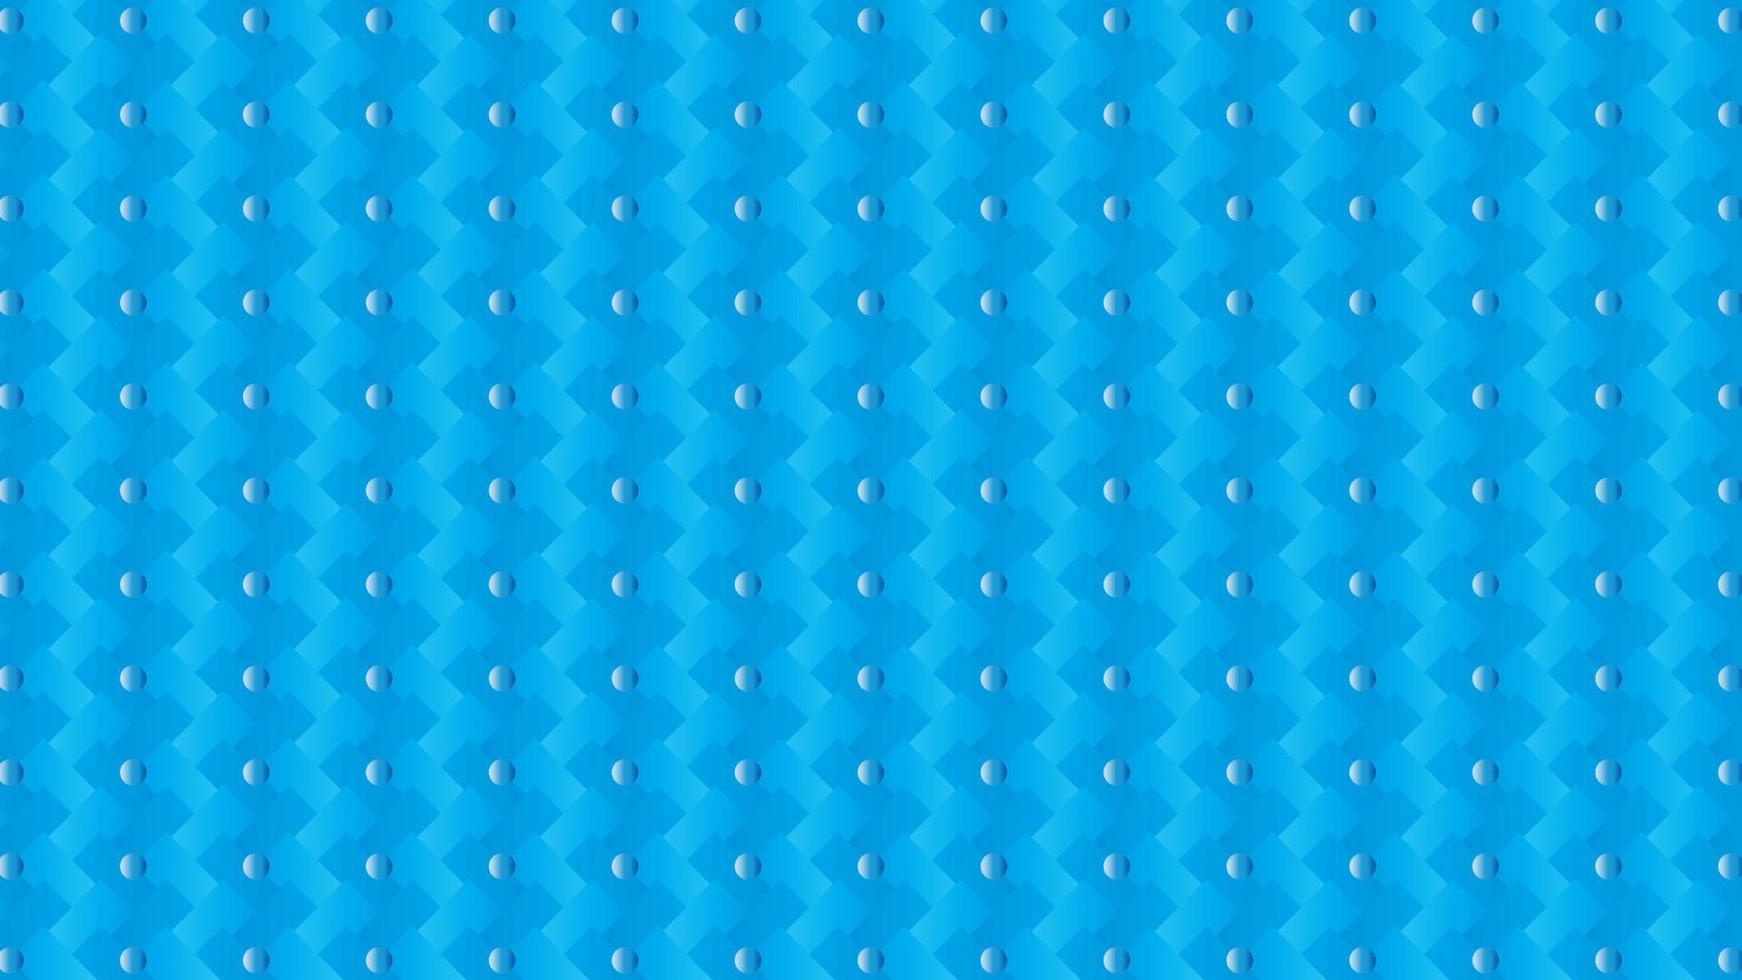 Abstract background of small dots on blue background , blue background with dots pattern vector